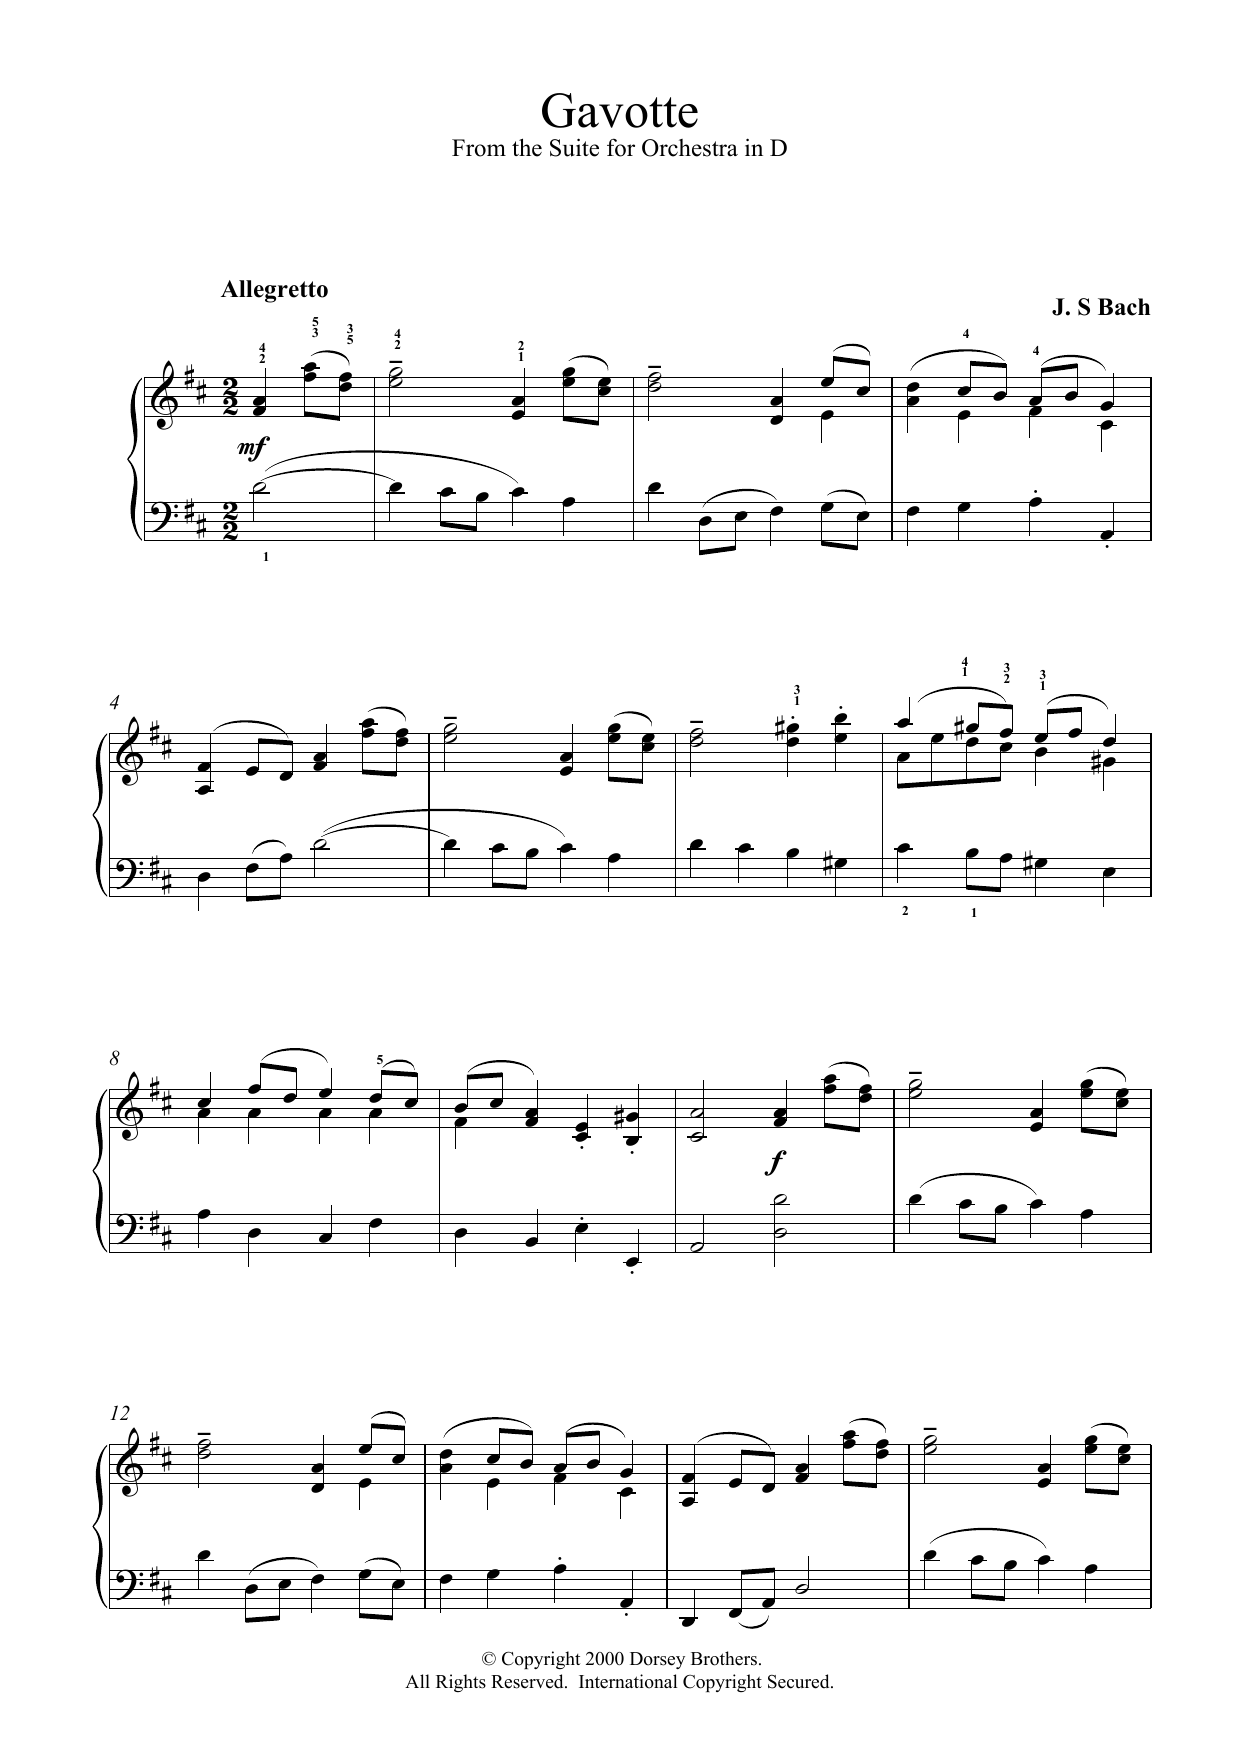 Johann Sebastian Bach Gavotte (from the Suite for Orchestra in D) sheet music notes printable PDF score